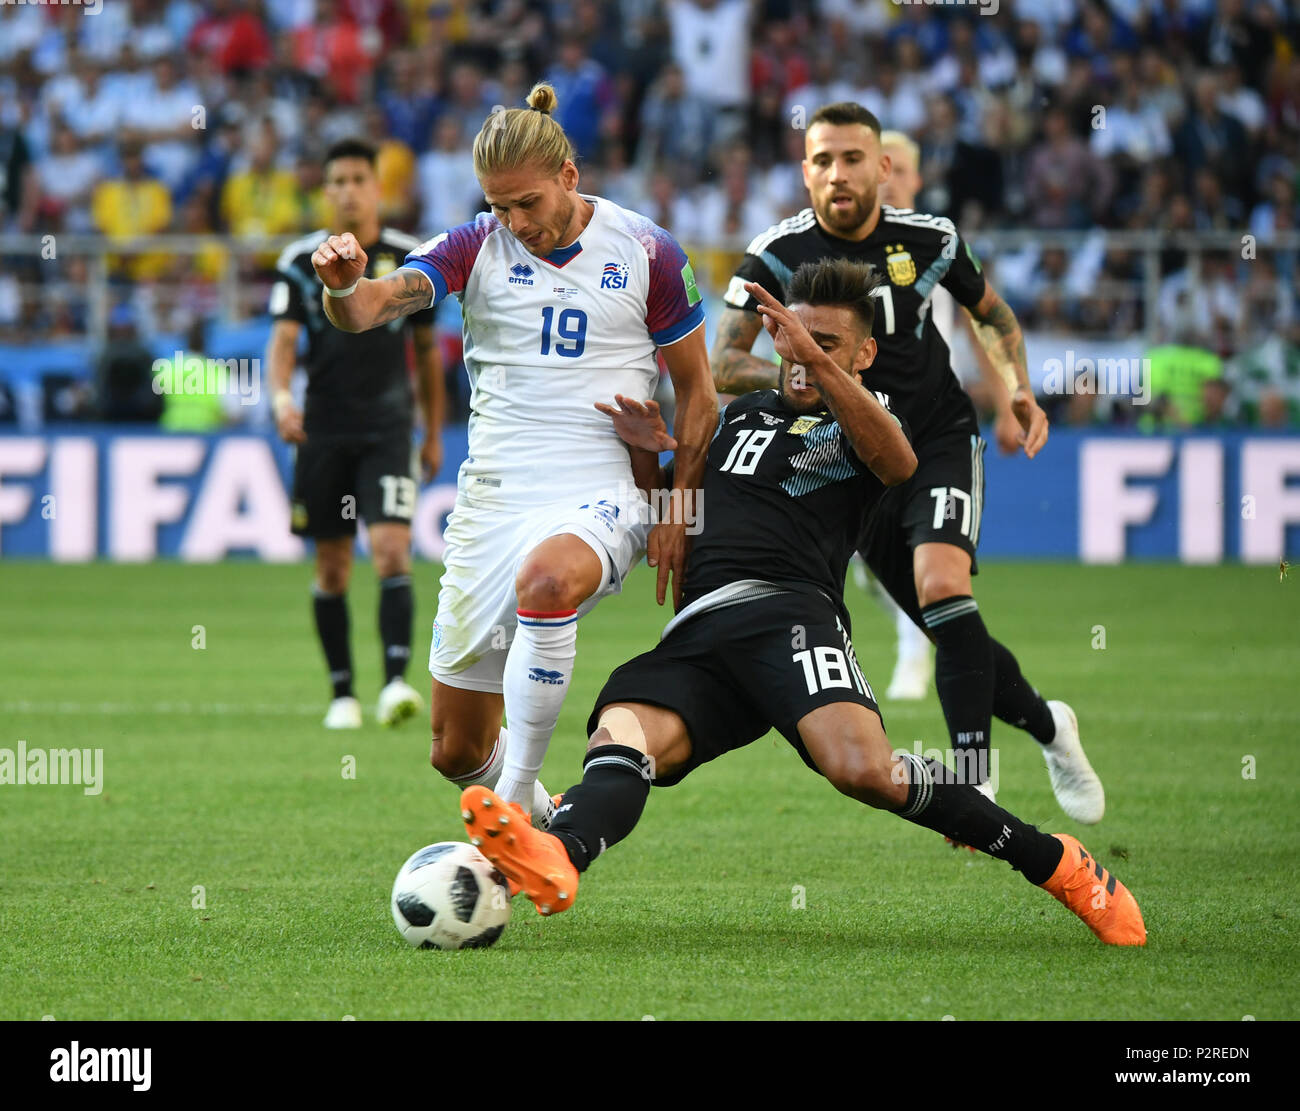 Moscow, Russia. 16th June, 2018. Rurik Gislason (L front) of Iceland vies with Eduardo Salvio (R front) of Argentina during a group D match between Argentina and Iceland at the 2018 FIFA World Cup in Moscow, Russia, June 16, 2018. Credit: Du Yu/Xinhua/Alamy Live News Stock Photo